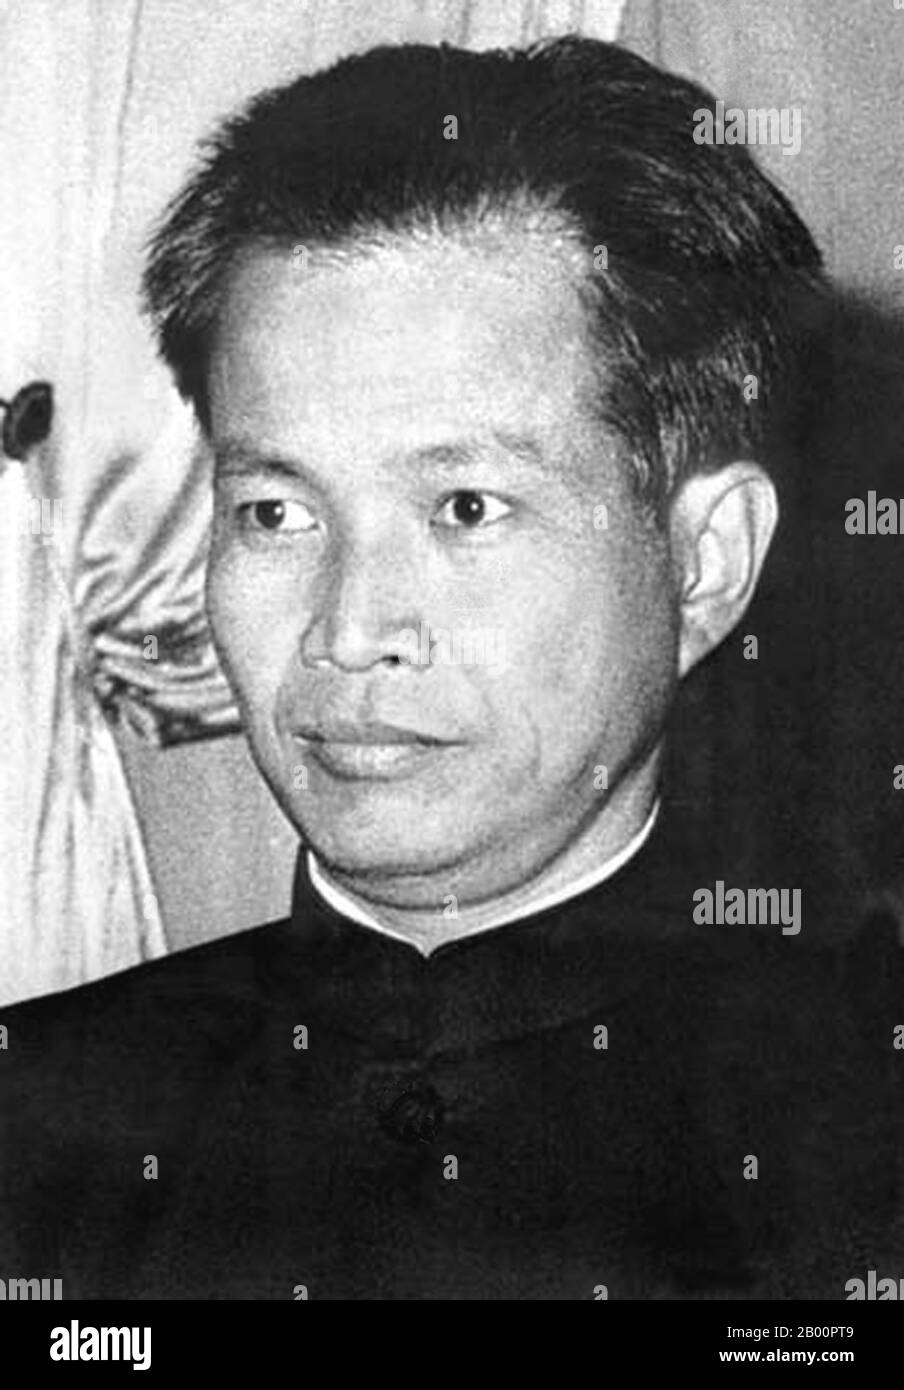 Cambodia: Khmer Rouge Leadership: Khieu Samphan, born July 27, 1931, was the President of the State Presidium of Democratic Kampuchea) from 1976 until 1979. As such, he served as Cambodia's head of state and was one of the most powerful officials in the Khmer Rouge movement, though Pol Pot was the group's true political leader and held the most extensive power. Stock Photo